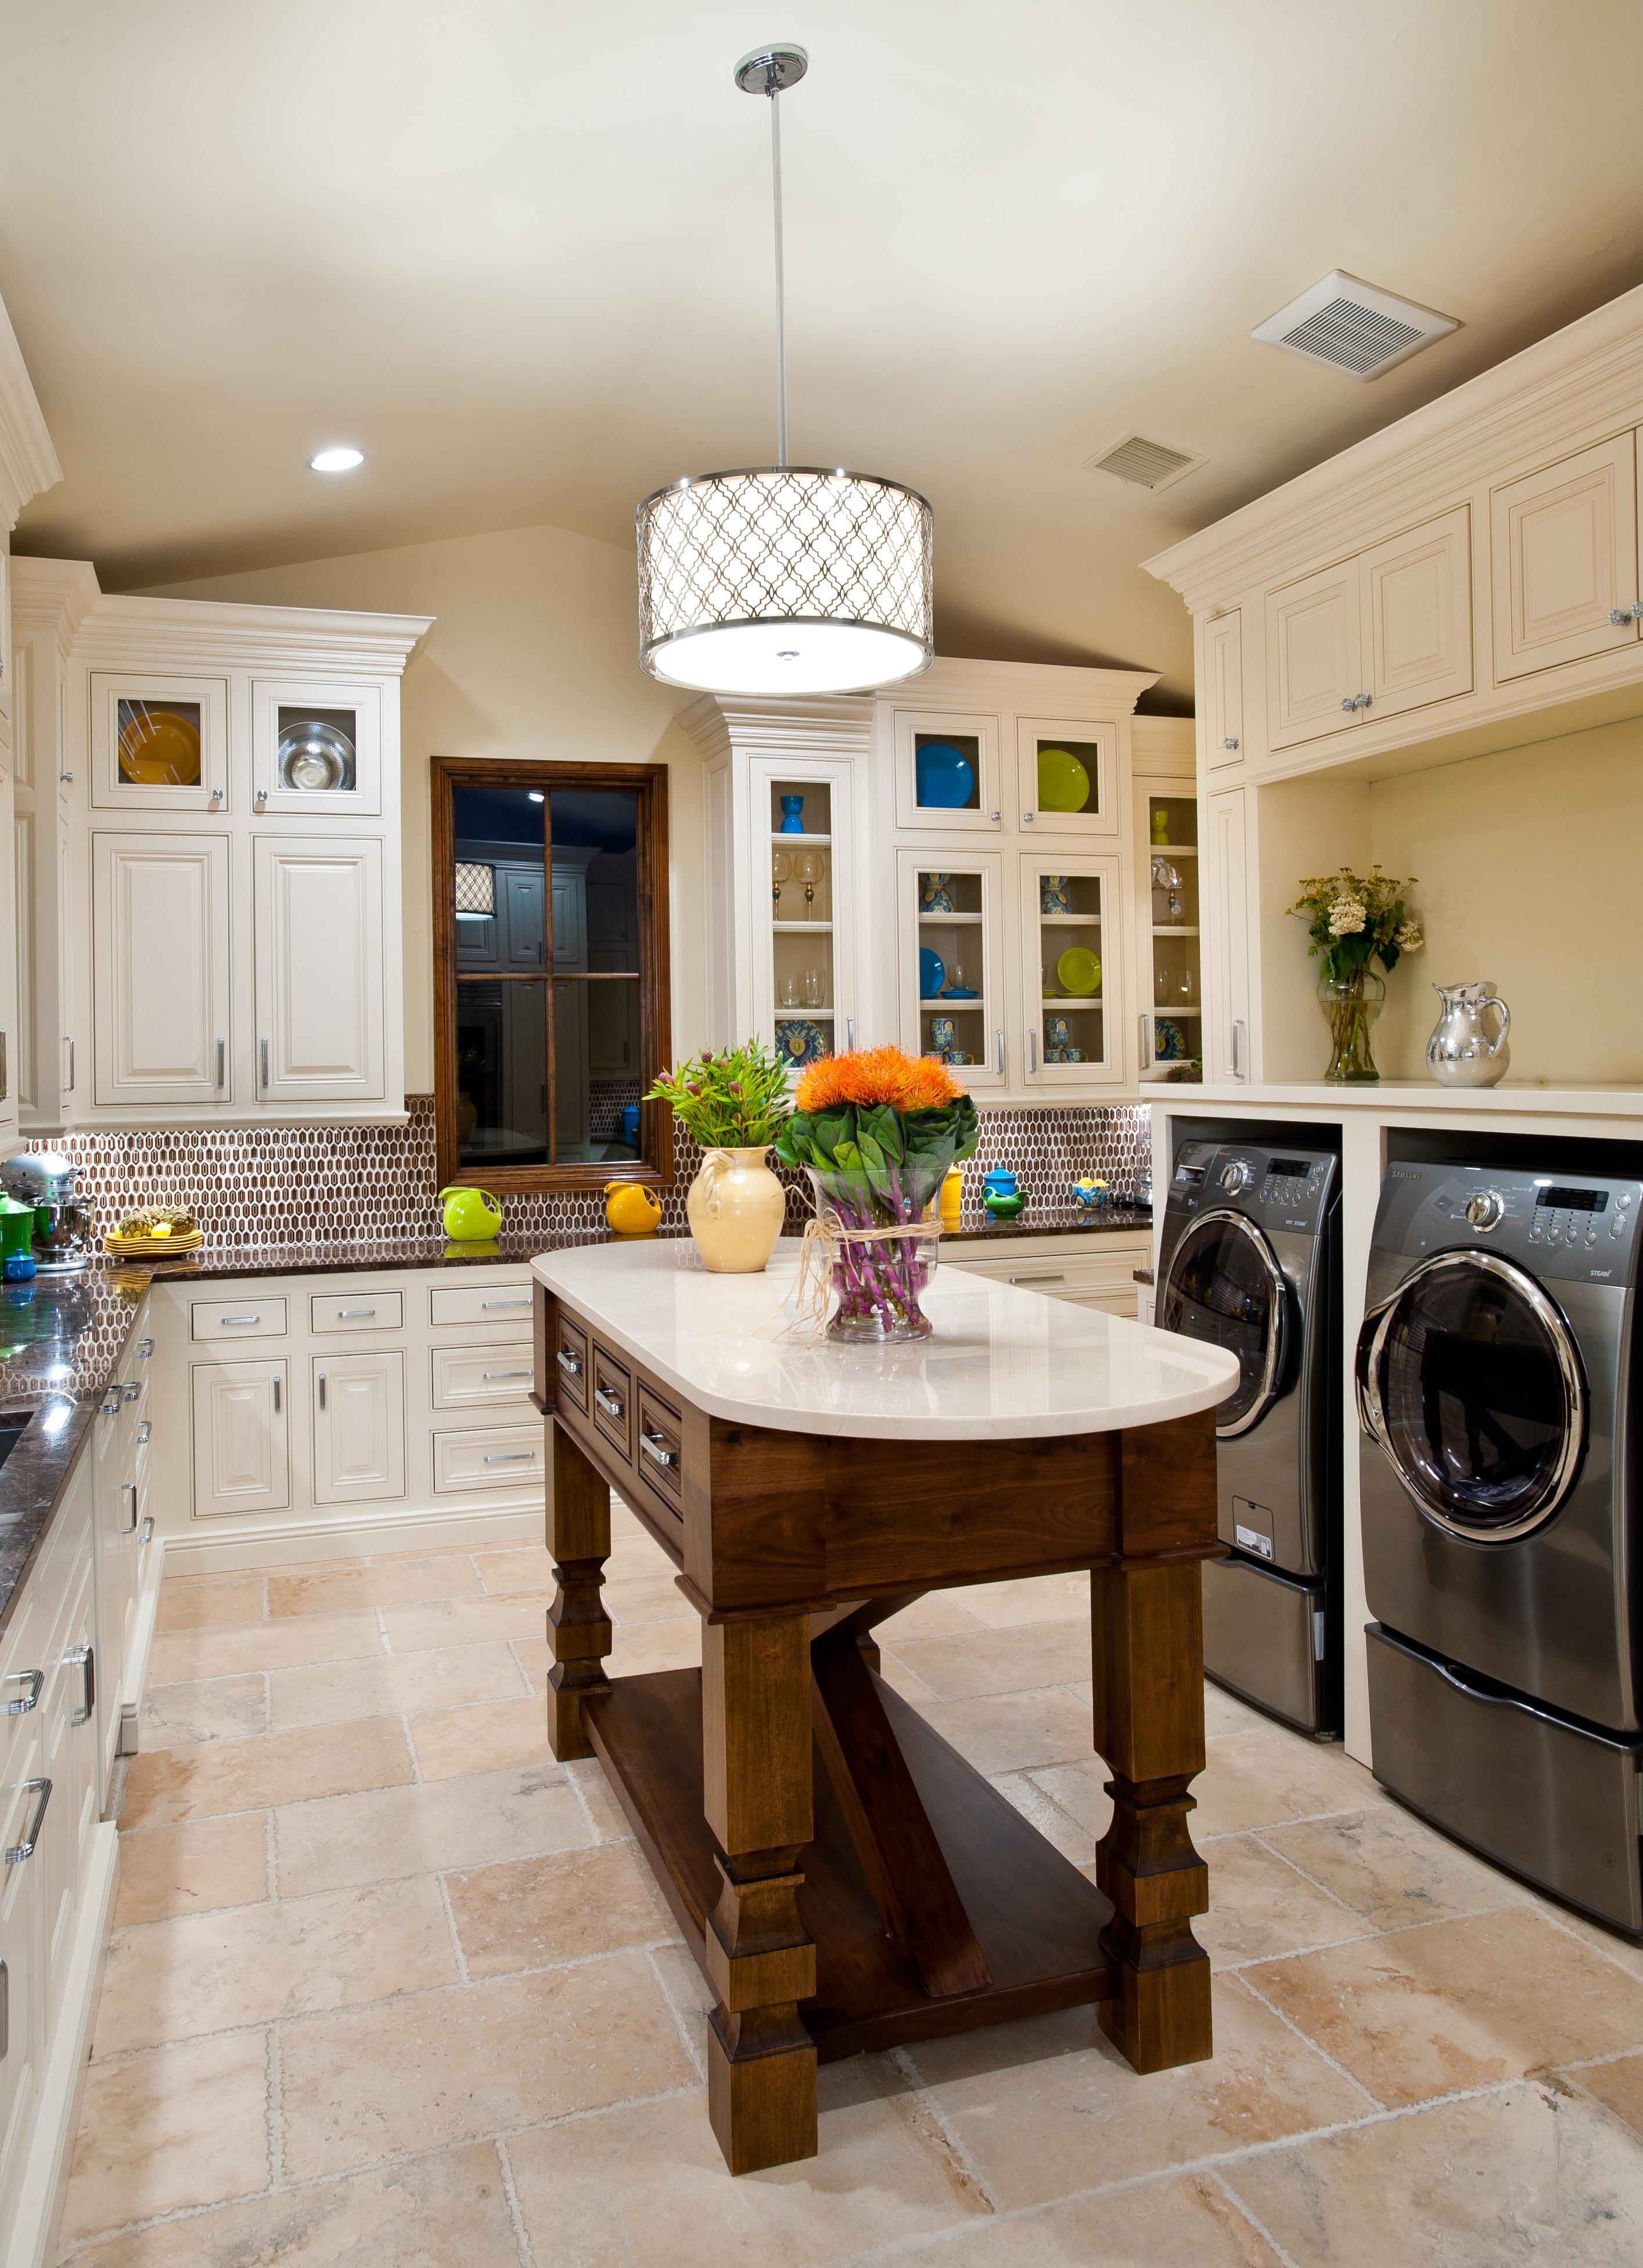 A Laundry Room and So Much More